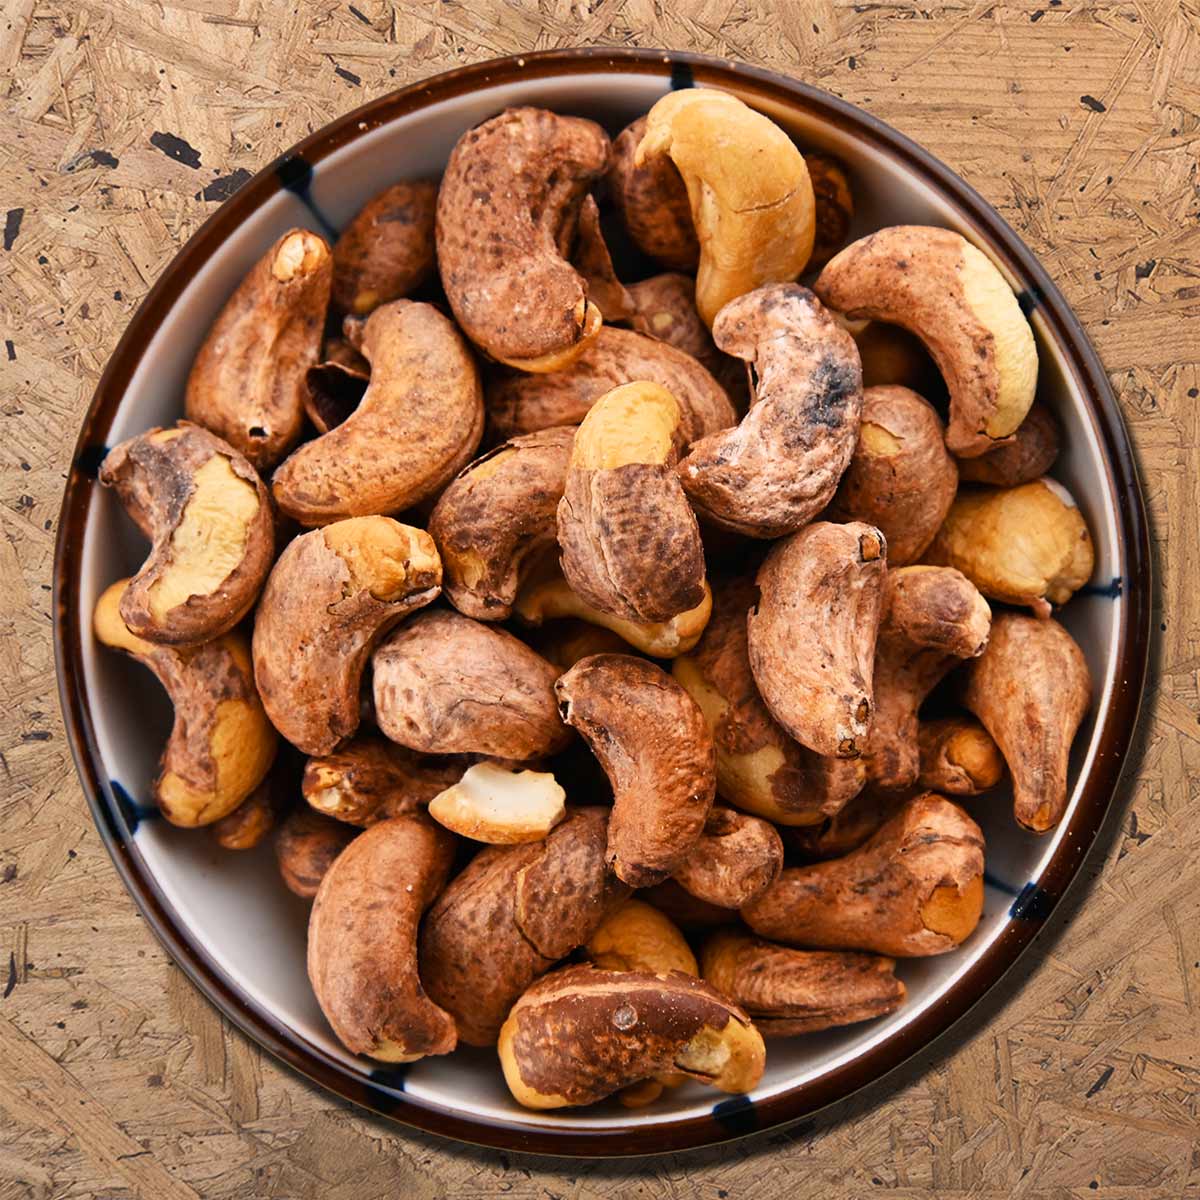 Roasted cashews without salt are the type of cashew kernels that still have Testa skin are roasted with very little salt (about 0.1 - 1% salt)